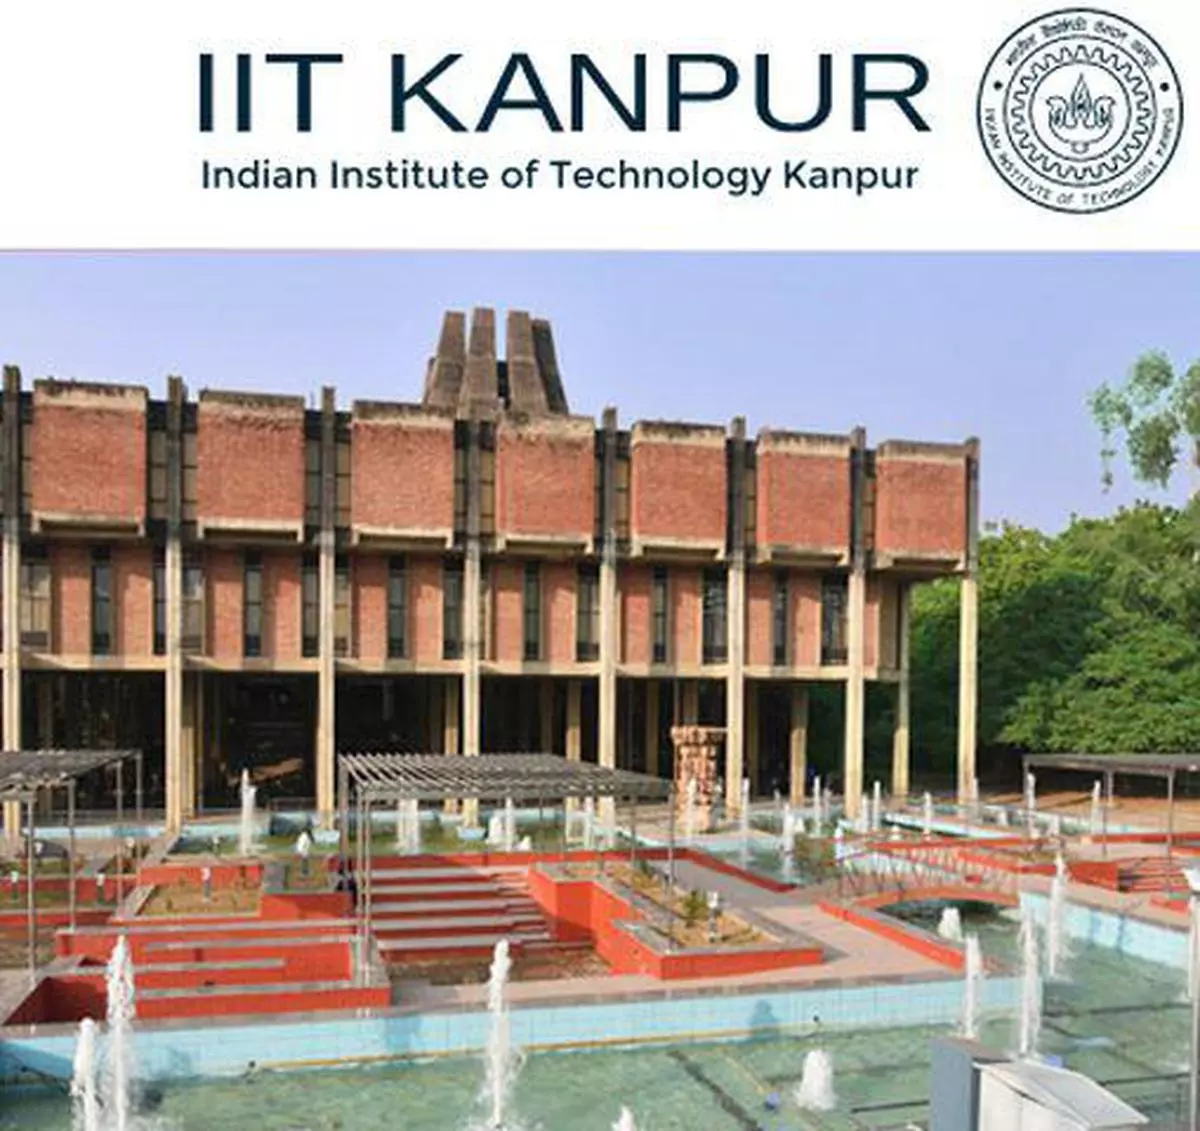 IIT Kanpur’s MBA program gets 100 per cent placement - The Hindu ...